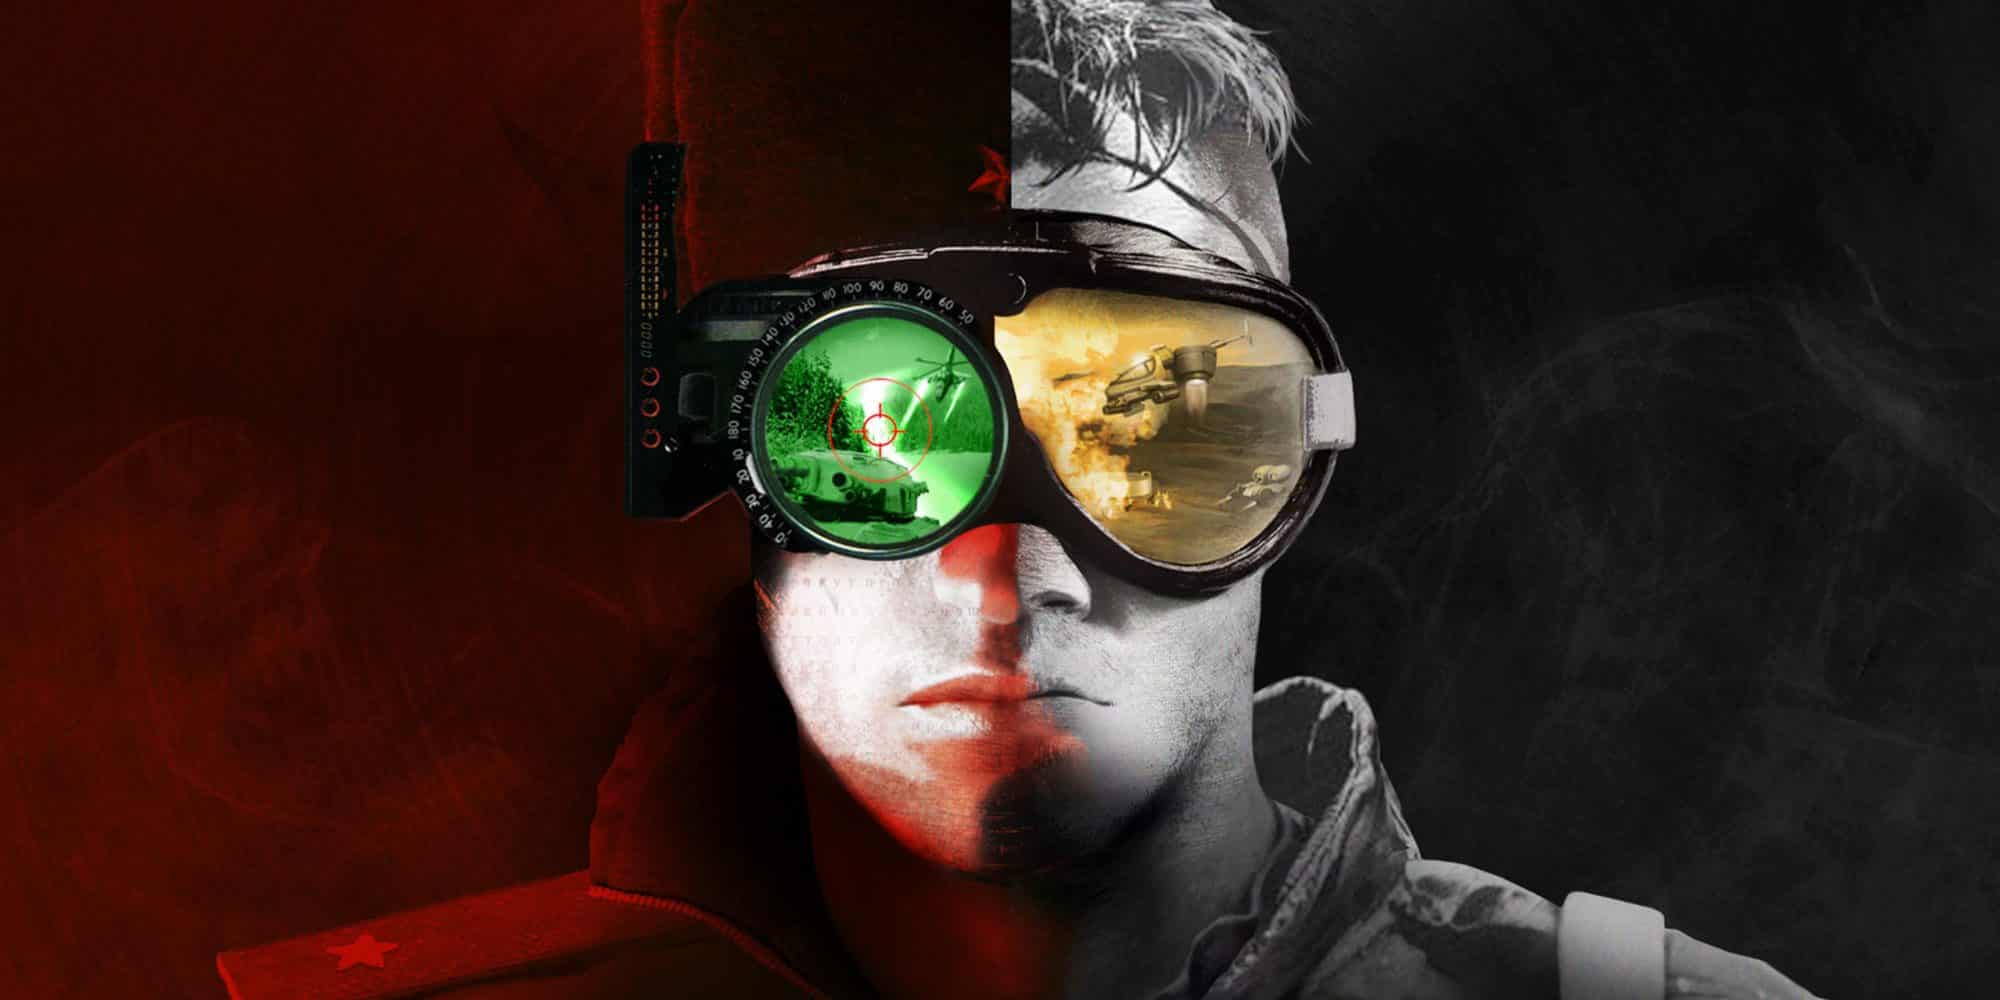 Command and conquer remastered. Ред Алерт ремастер. Red Alert 3 Remastered. Command & Conquer Remastered collection. Command & Conquer: Red Alert Remastered.